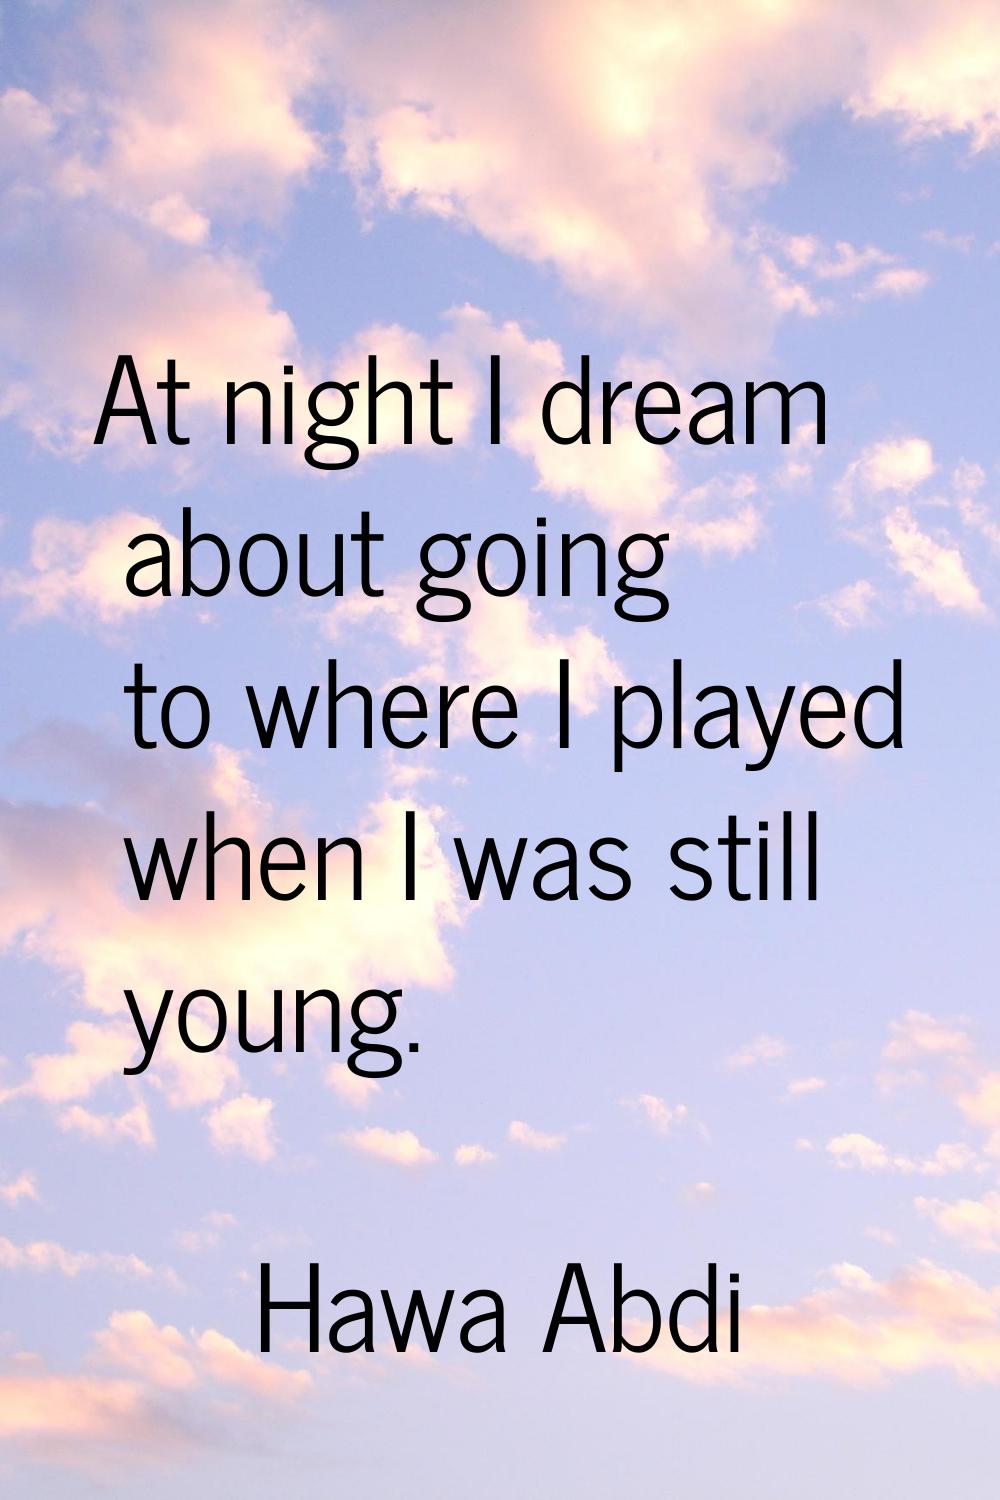 At night I dream about going to where I played when I was still young.